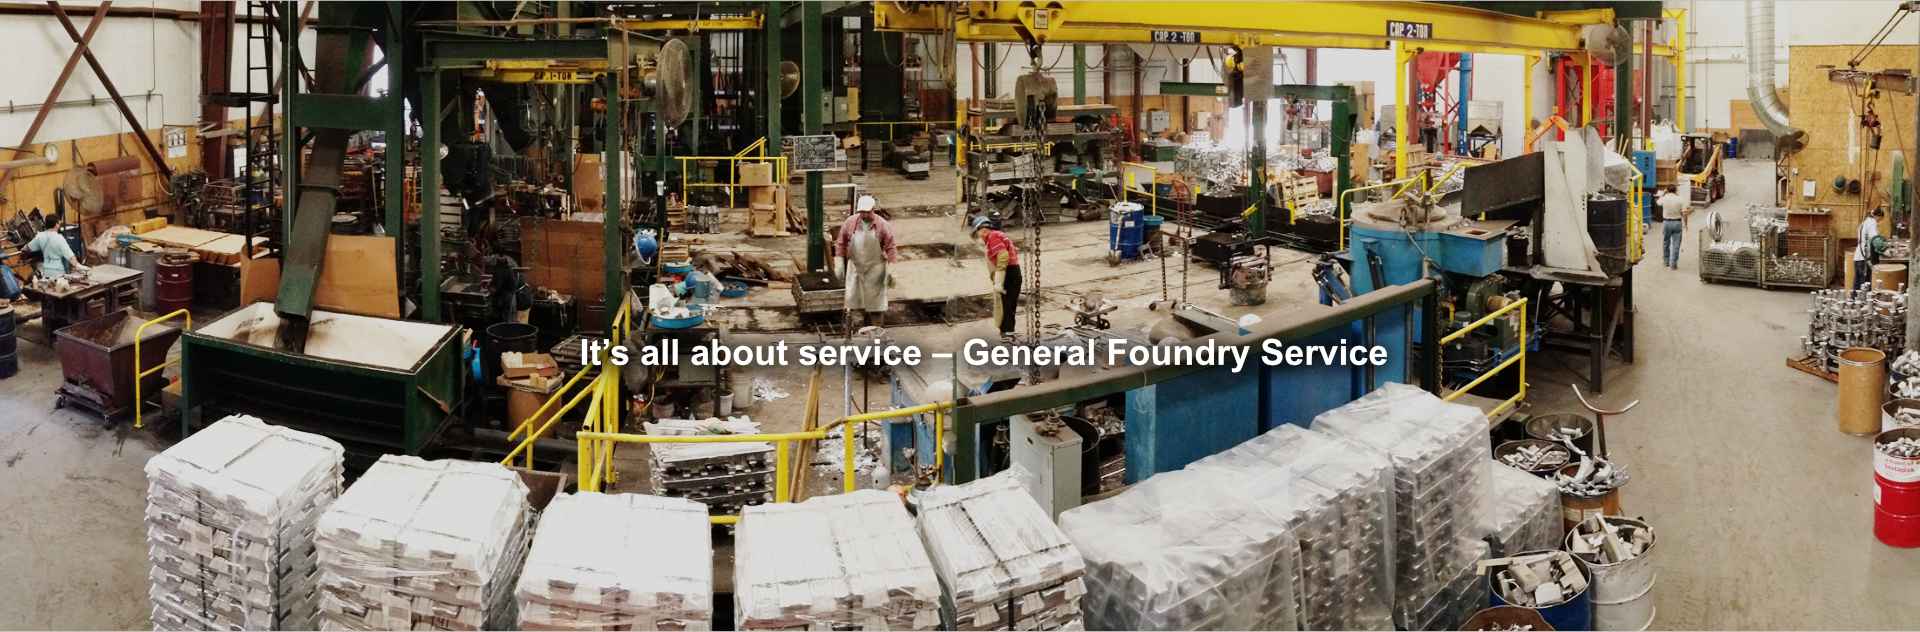 General Foundry